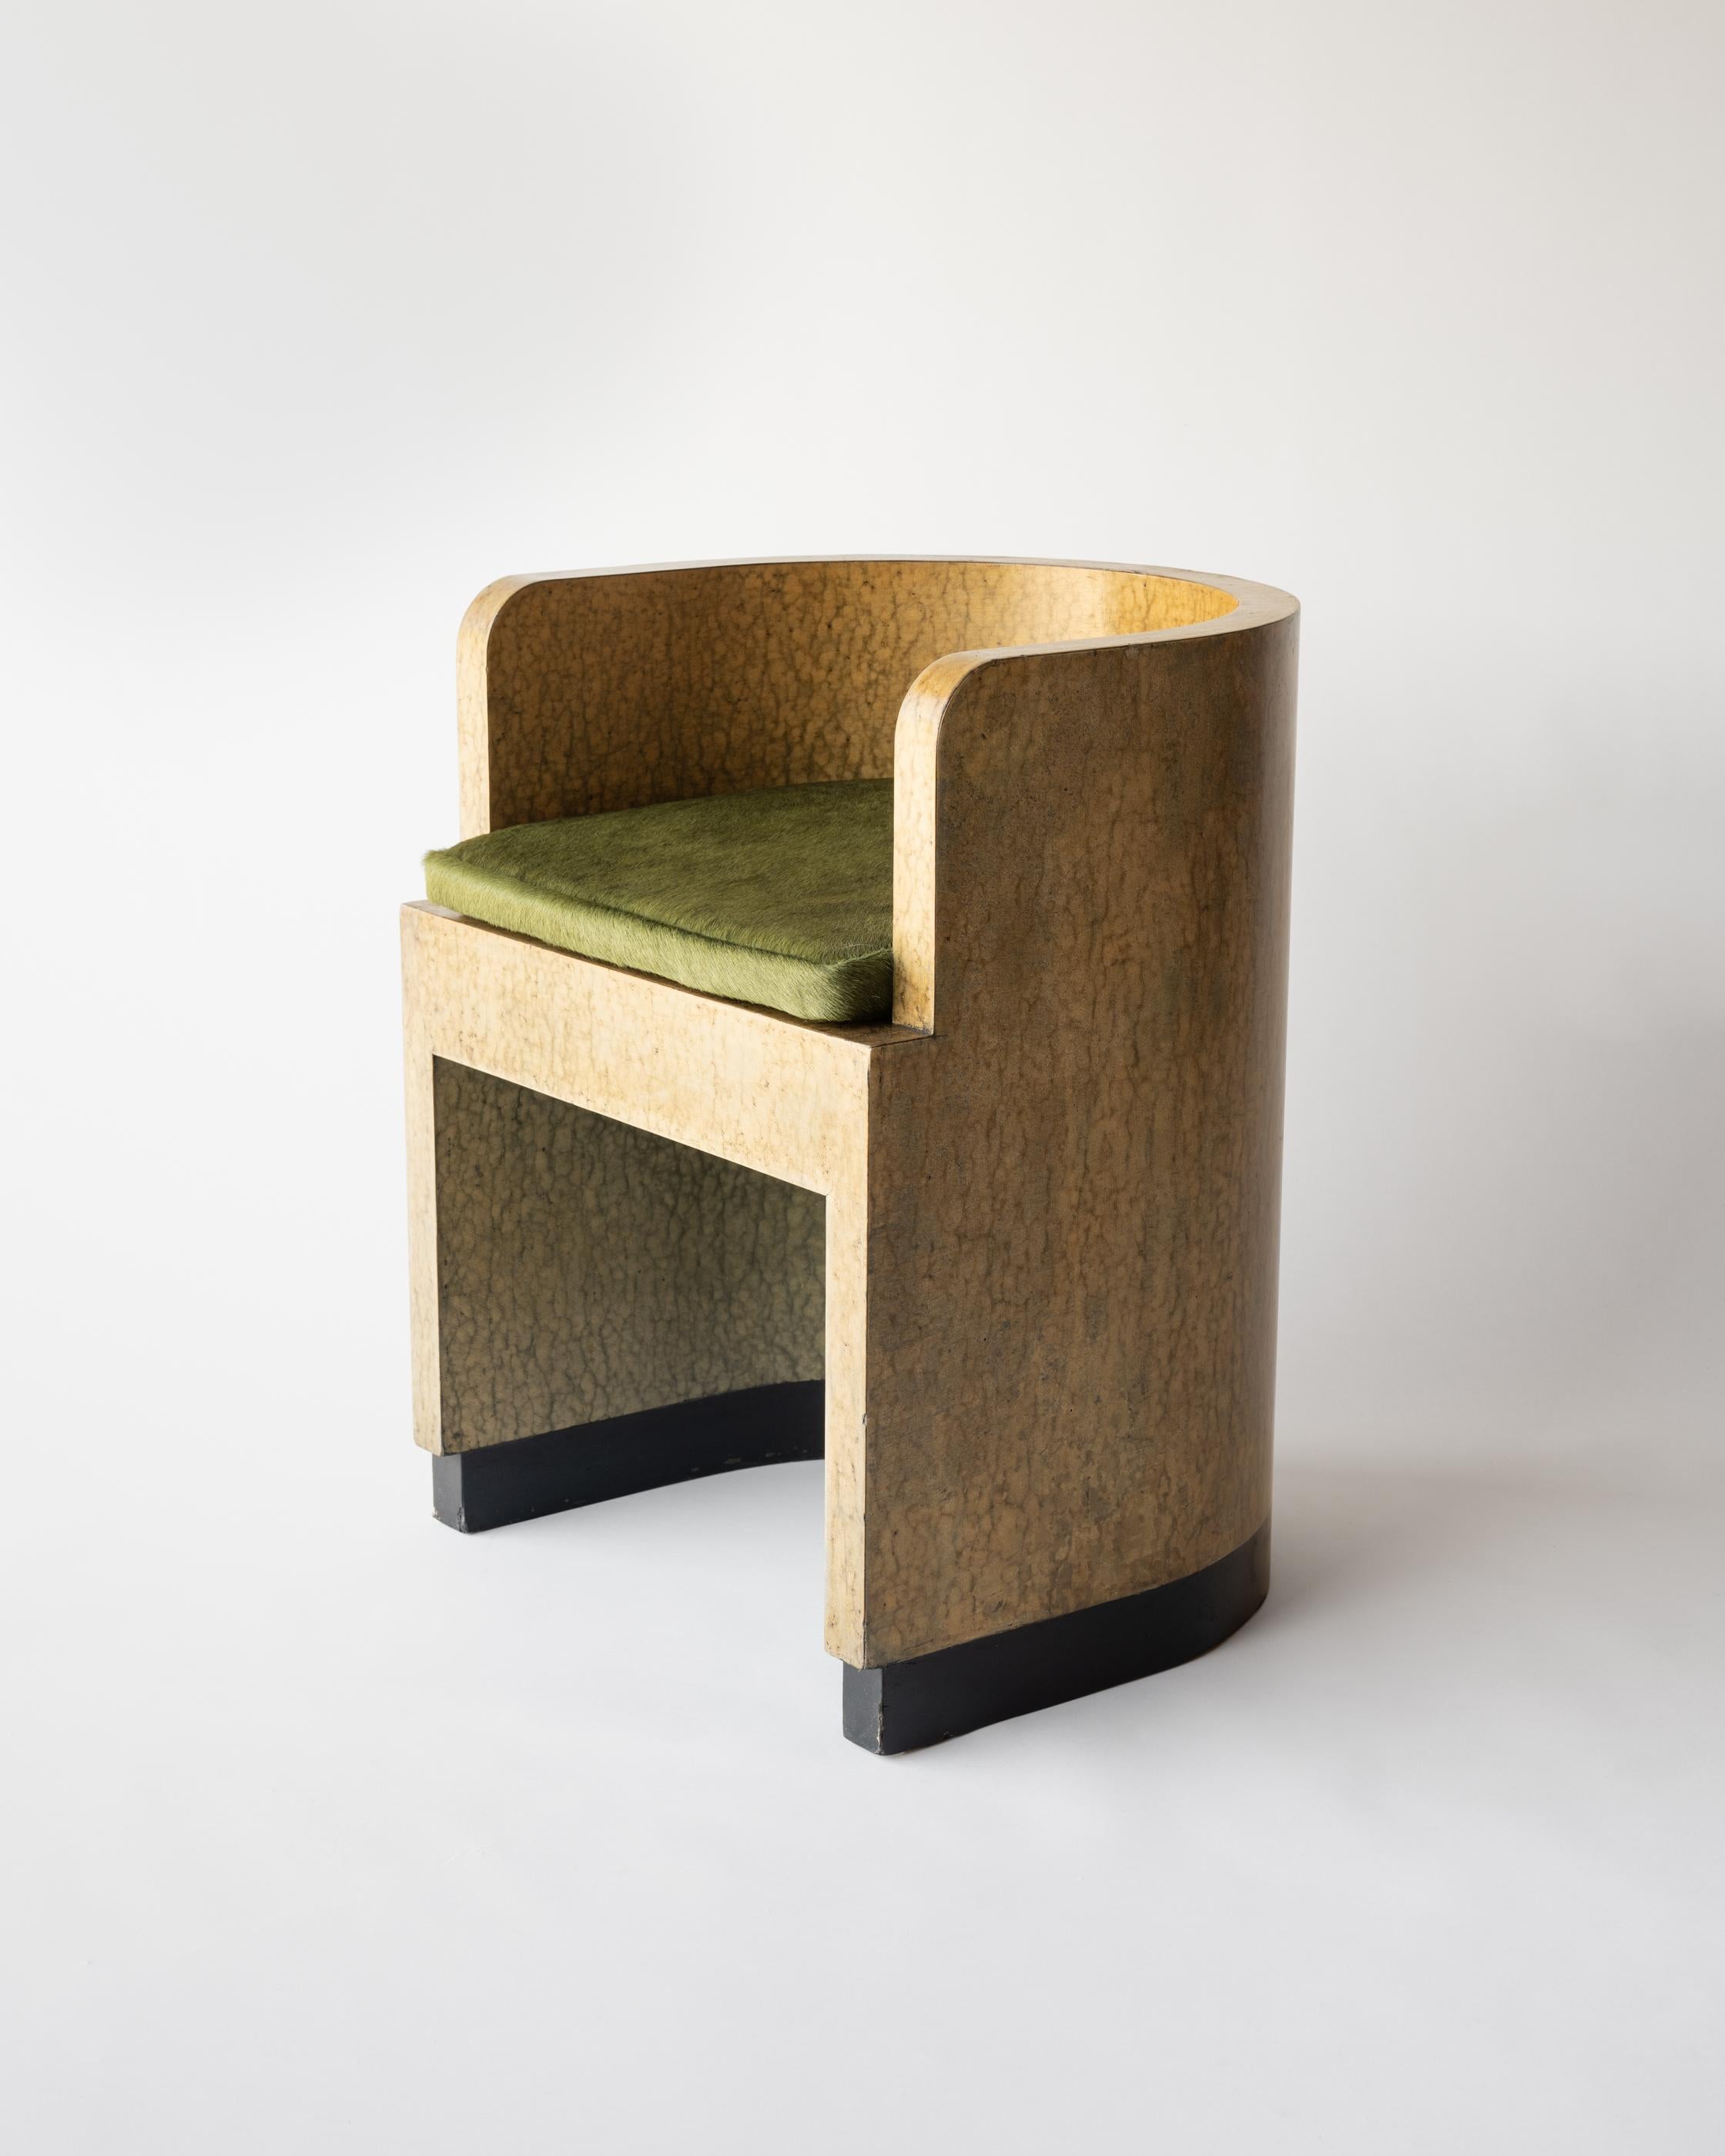 Streamlined Moderne Gino Levi Montalcini & Giuseppe Pagano, Curved Back Armchair, c. 1928 For Sale